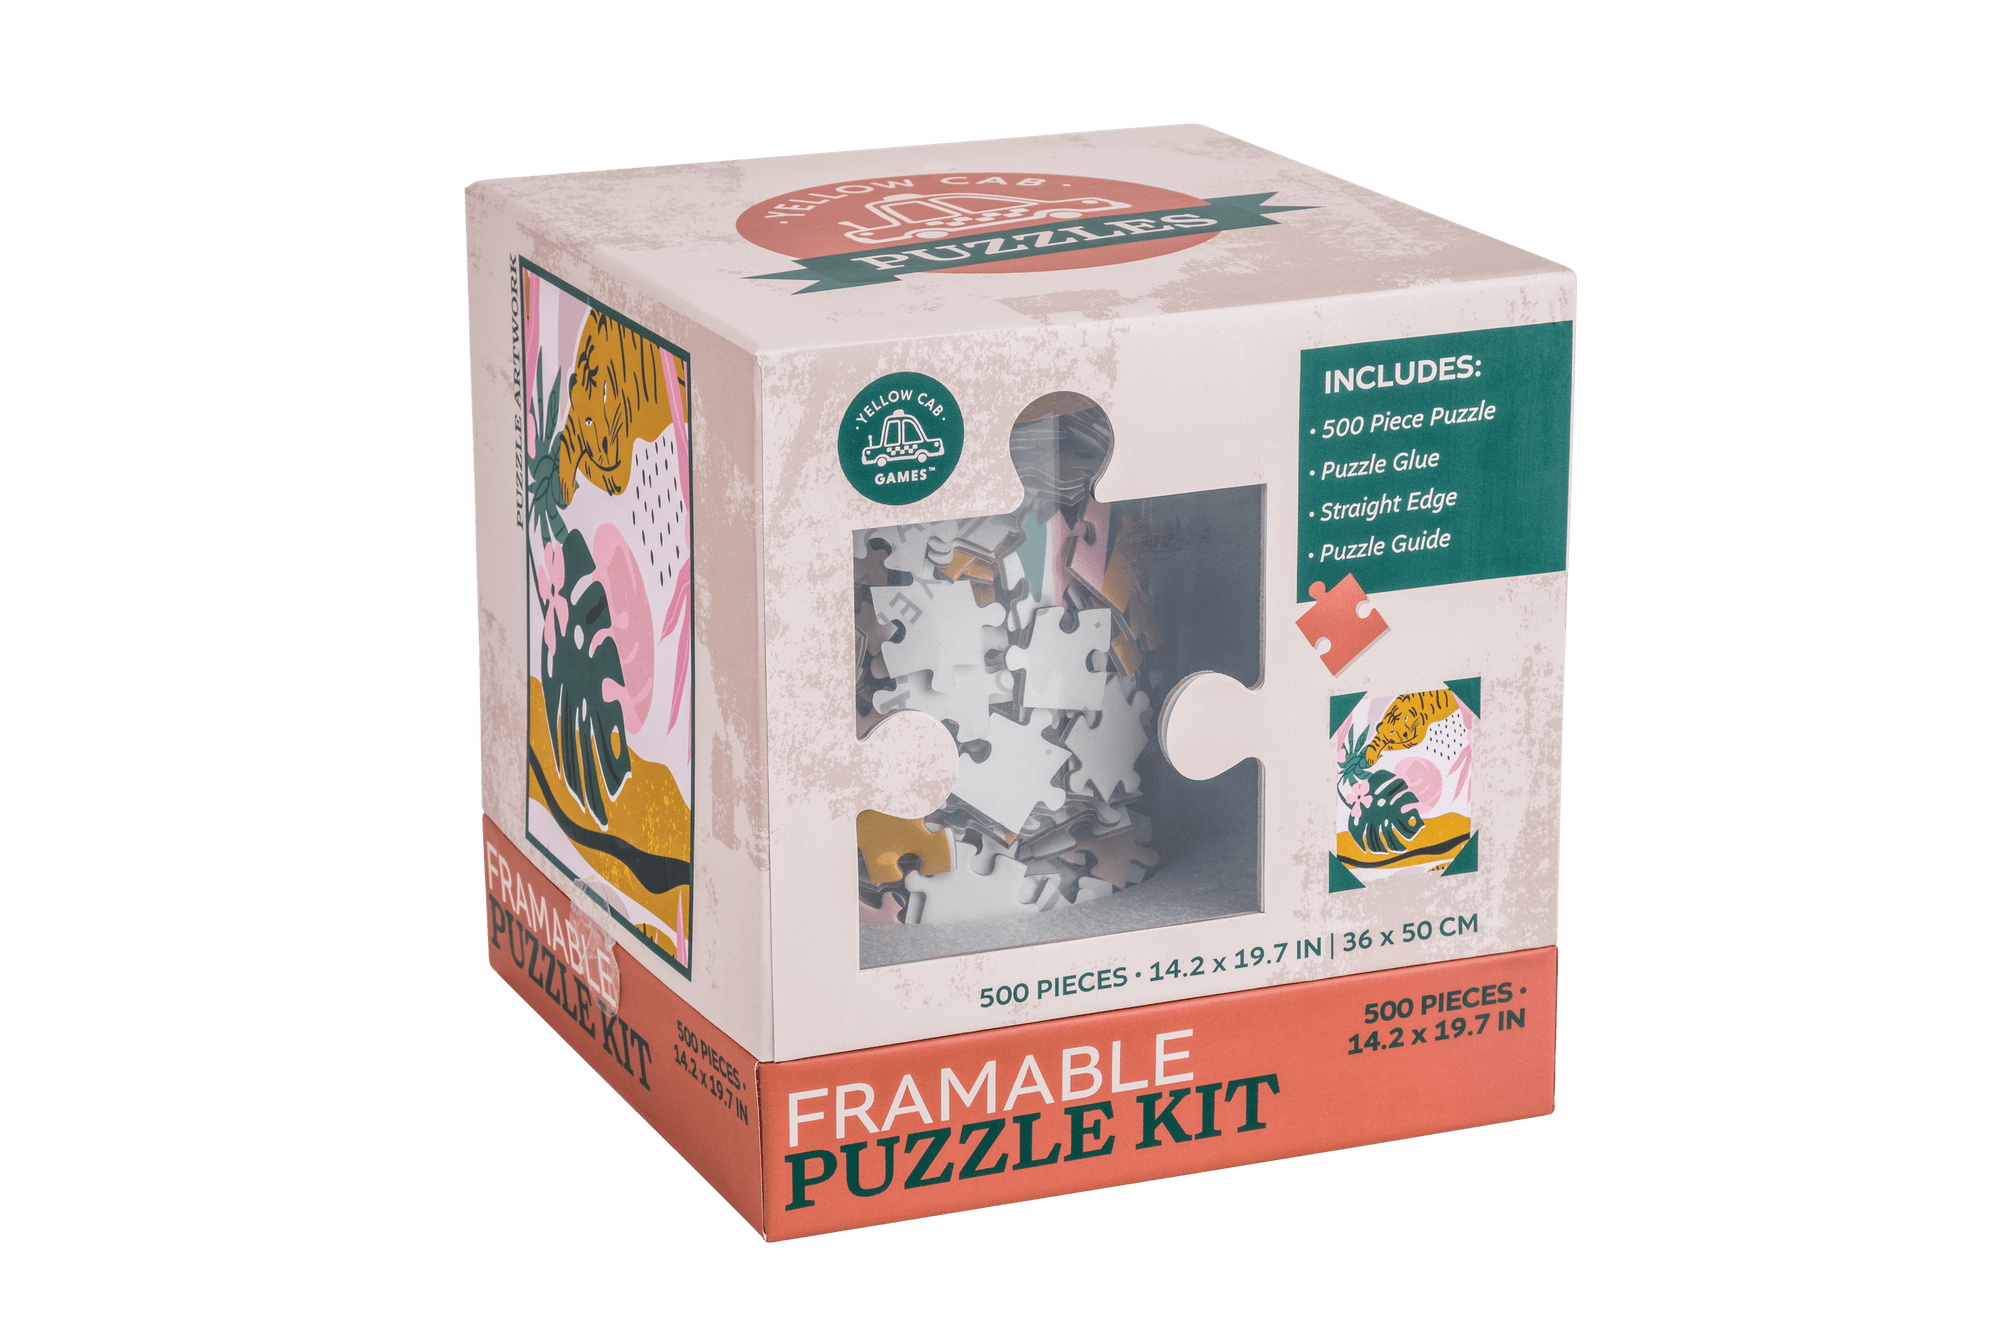 Tiger Framable Puzzle